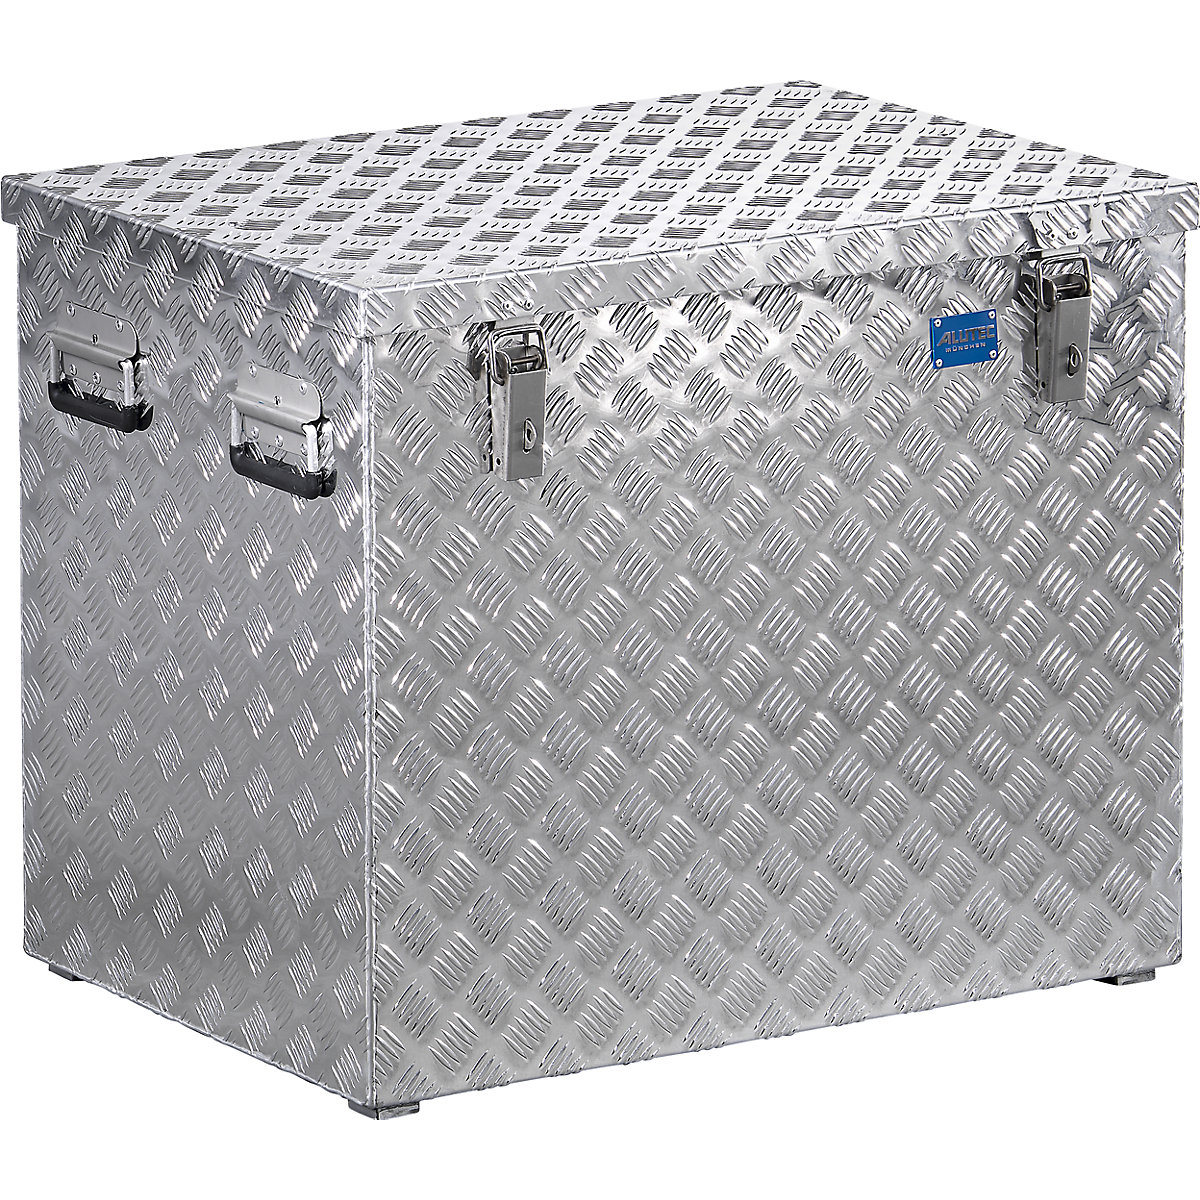 Aluminium chequer plate transport case, without gas pressure spring, capacity 234 l-14